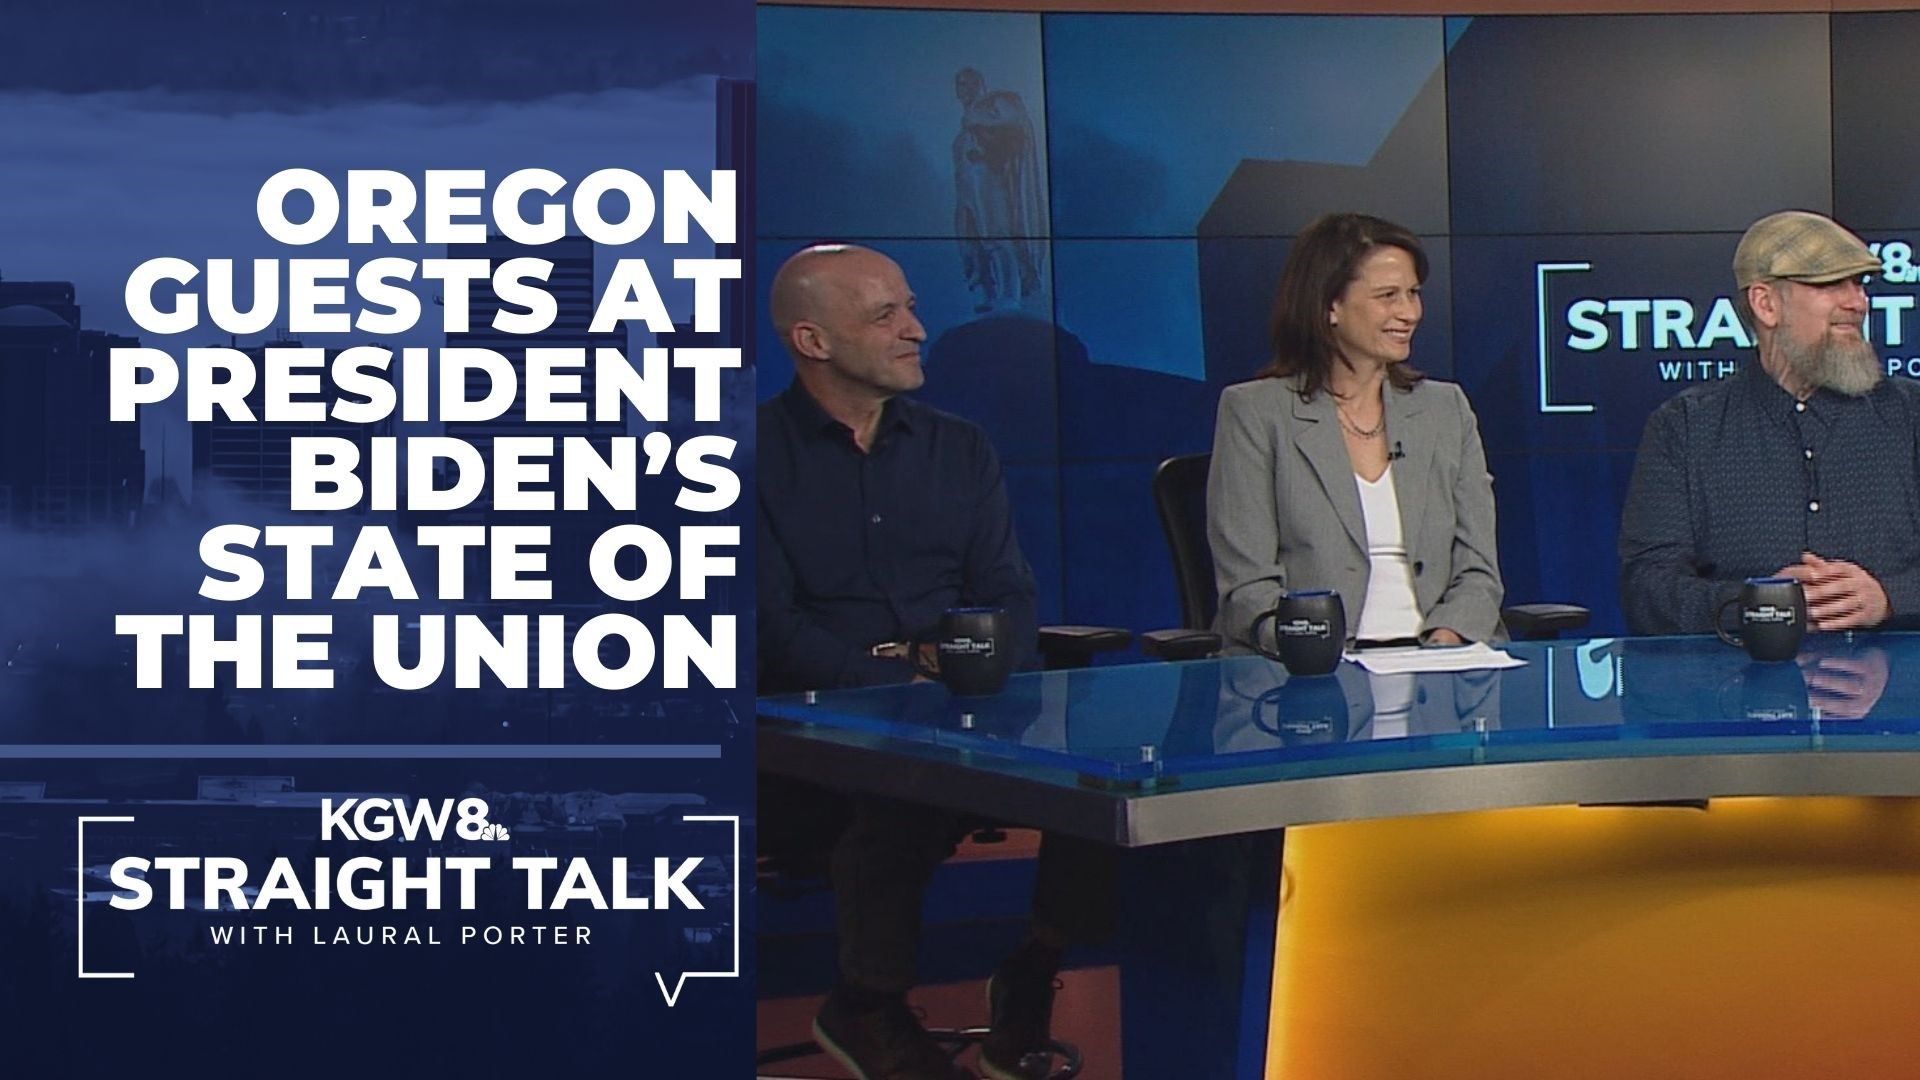 The guests of Oregon's Congress members at President Joe Biden's State of the Union address talk takeaways from his speech.